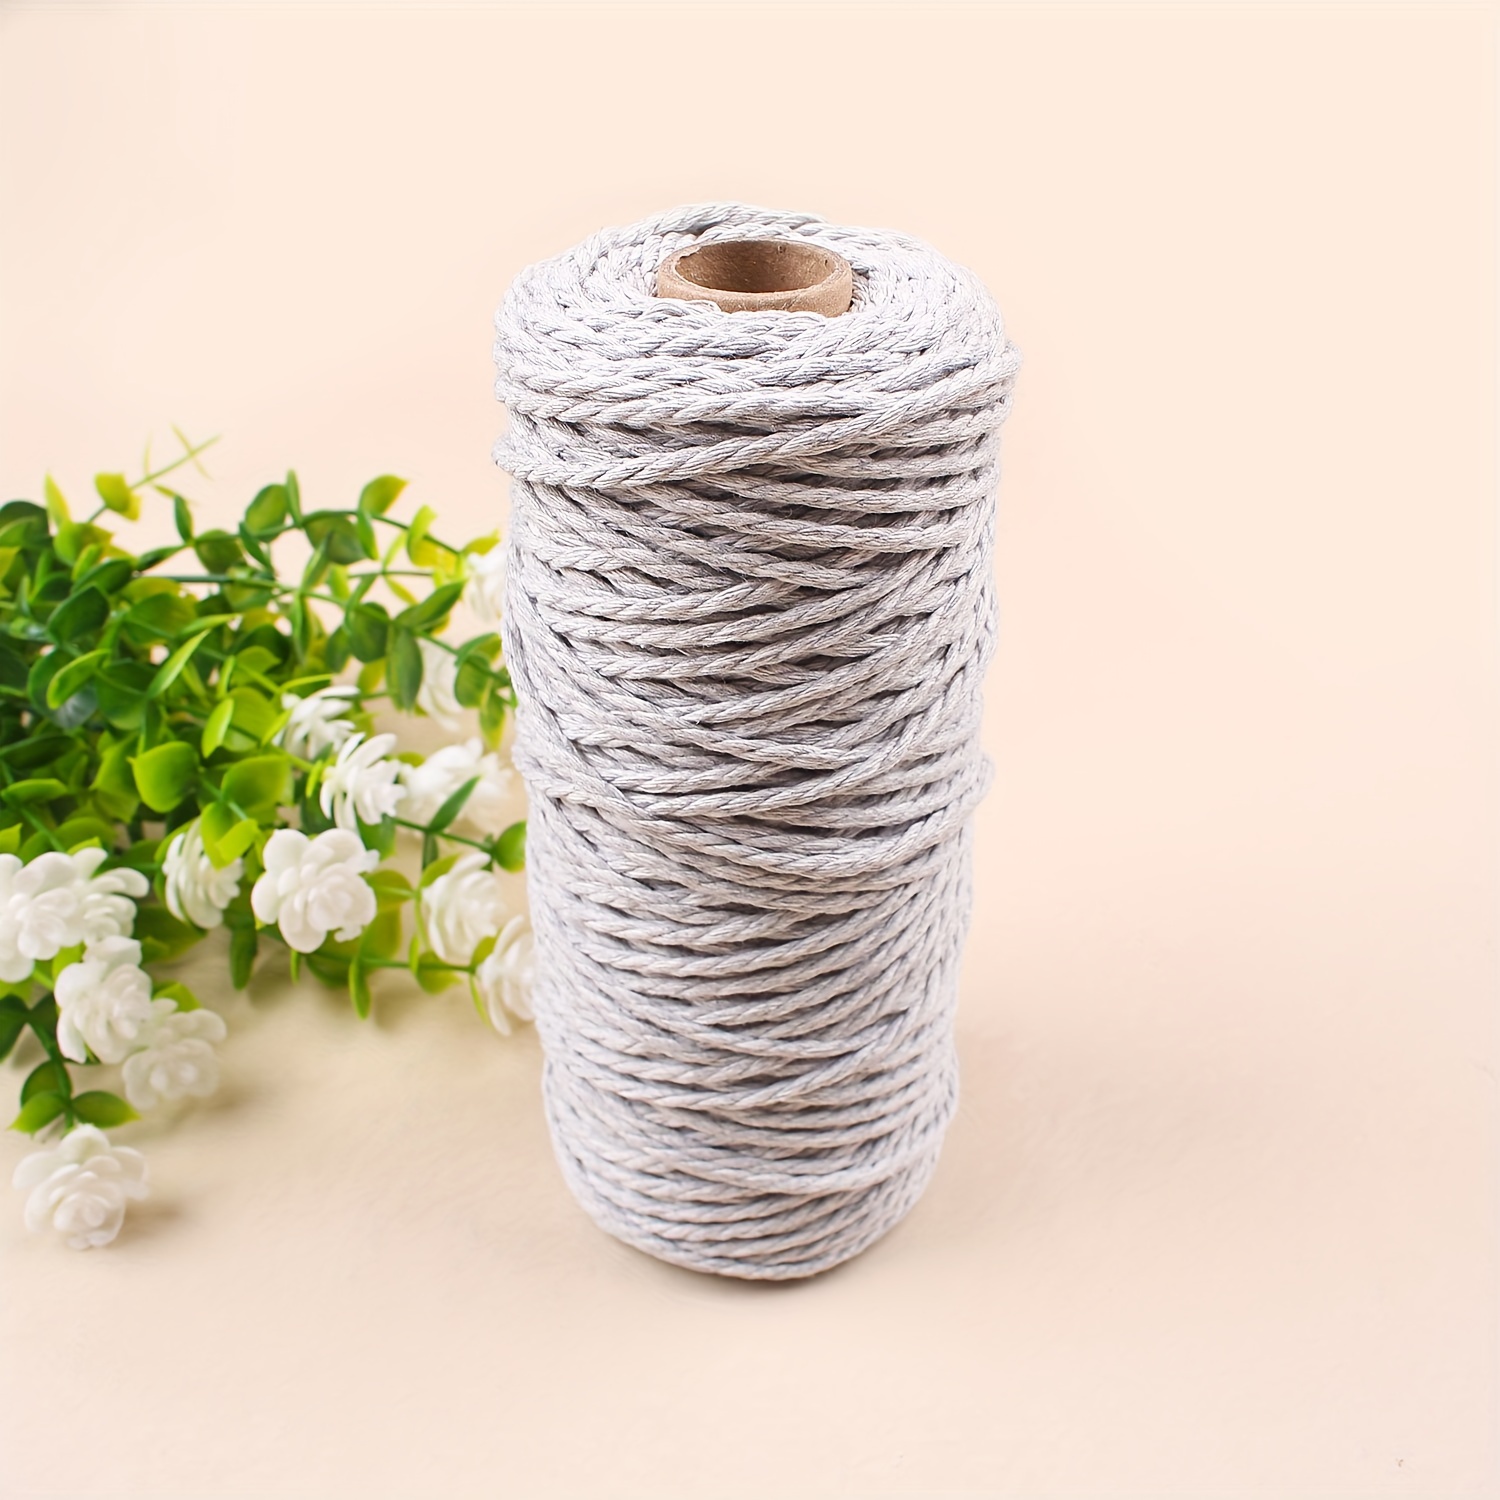 1pc Natural Jute String, Twisted And Thick For Vintage Garden Decoration,  Diy Weaving, Hangtag String